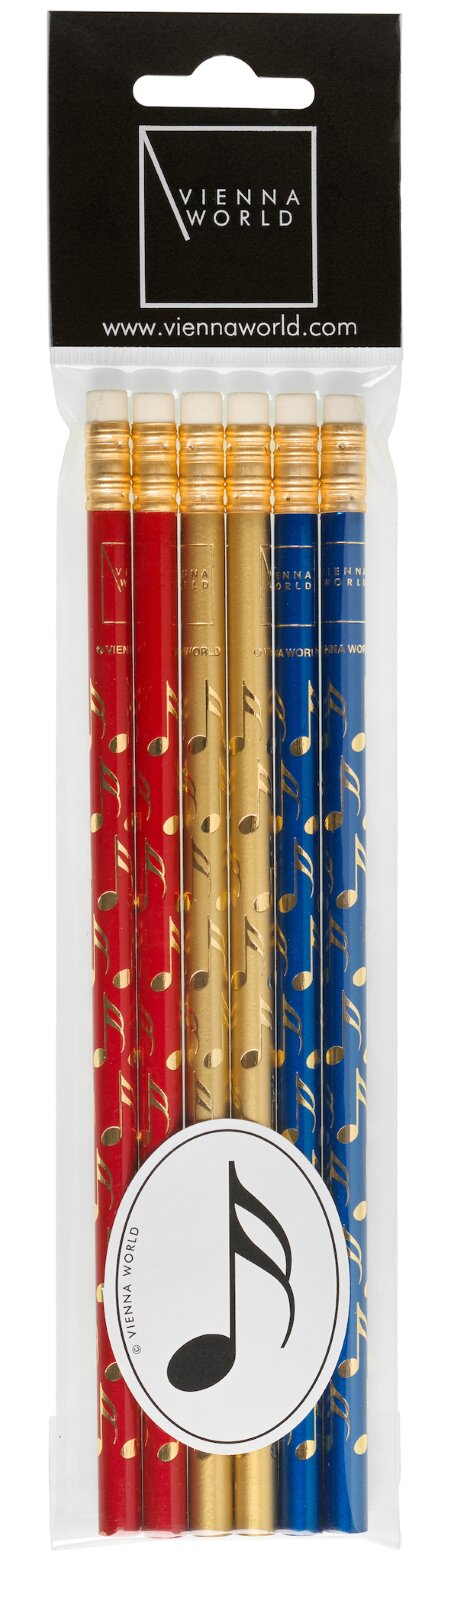 Vienna World Set 6 Crayon avec gommePencil Set - Notes (Coloured 6 Pack) red/gold/blue (6 pieces per package)  Schreibmaterial Z 727 : photo 1